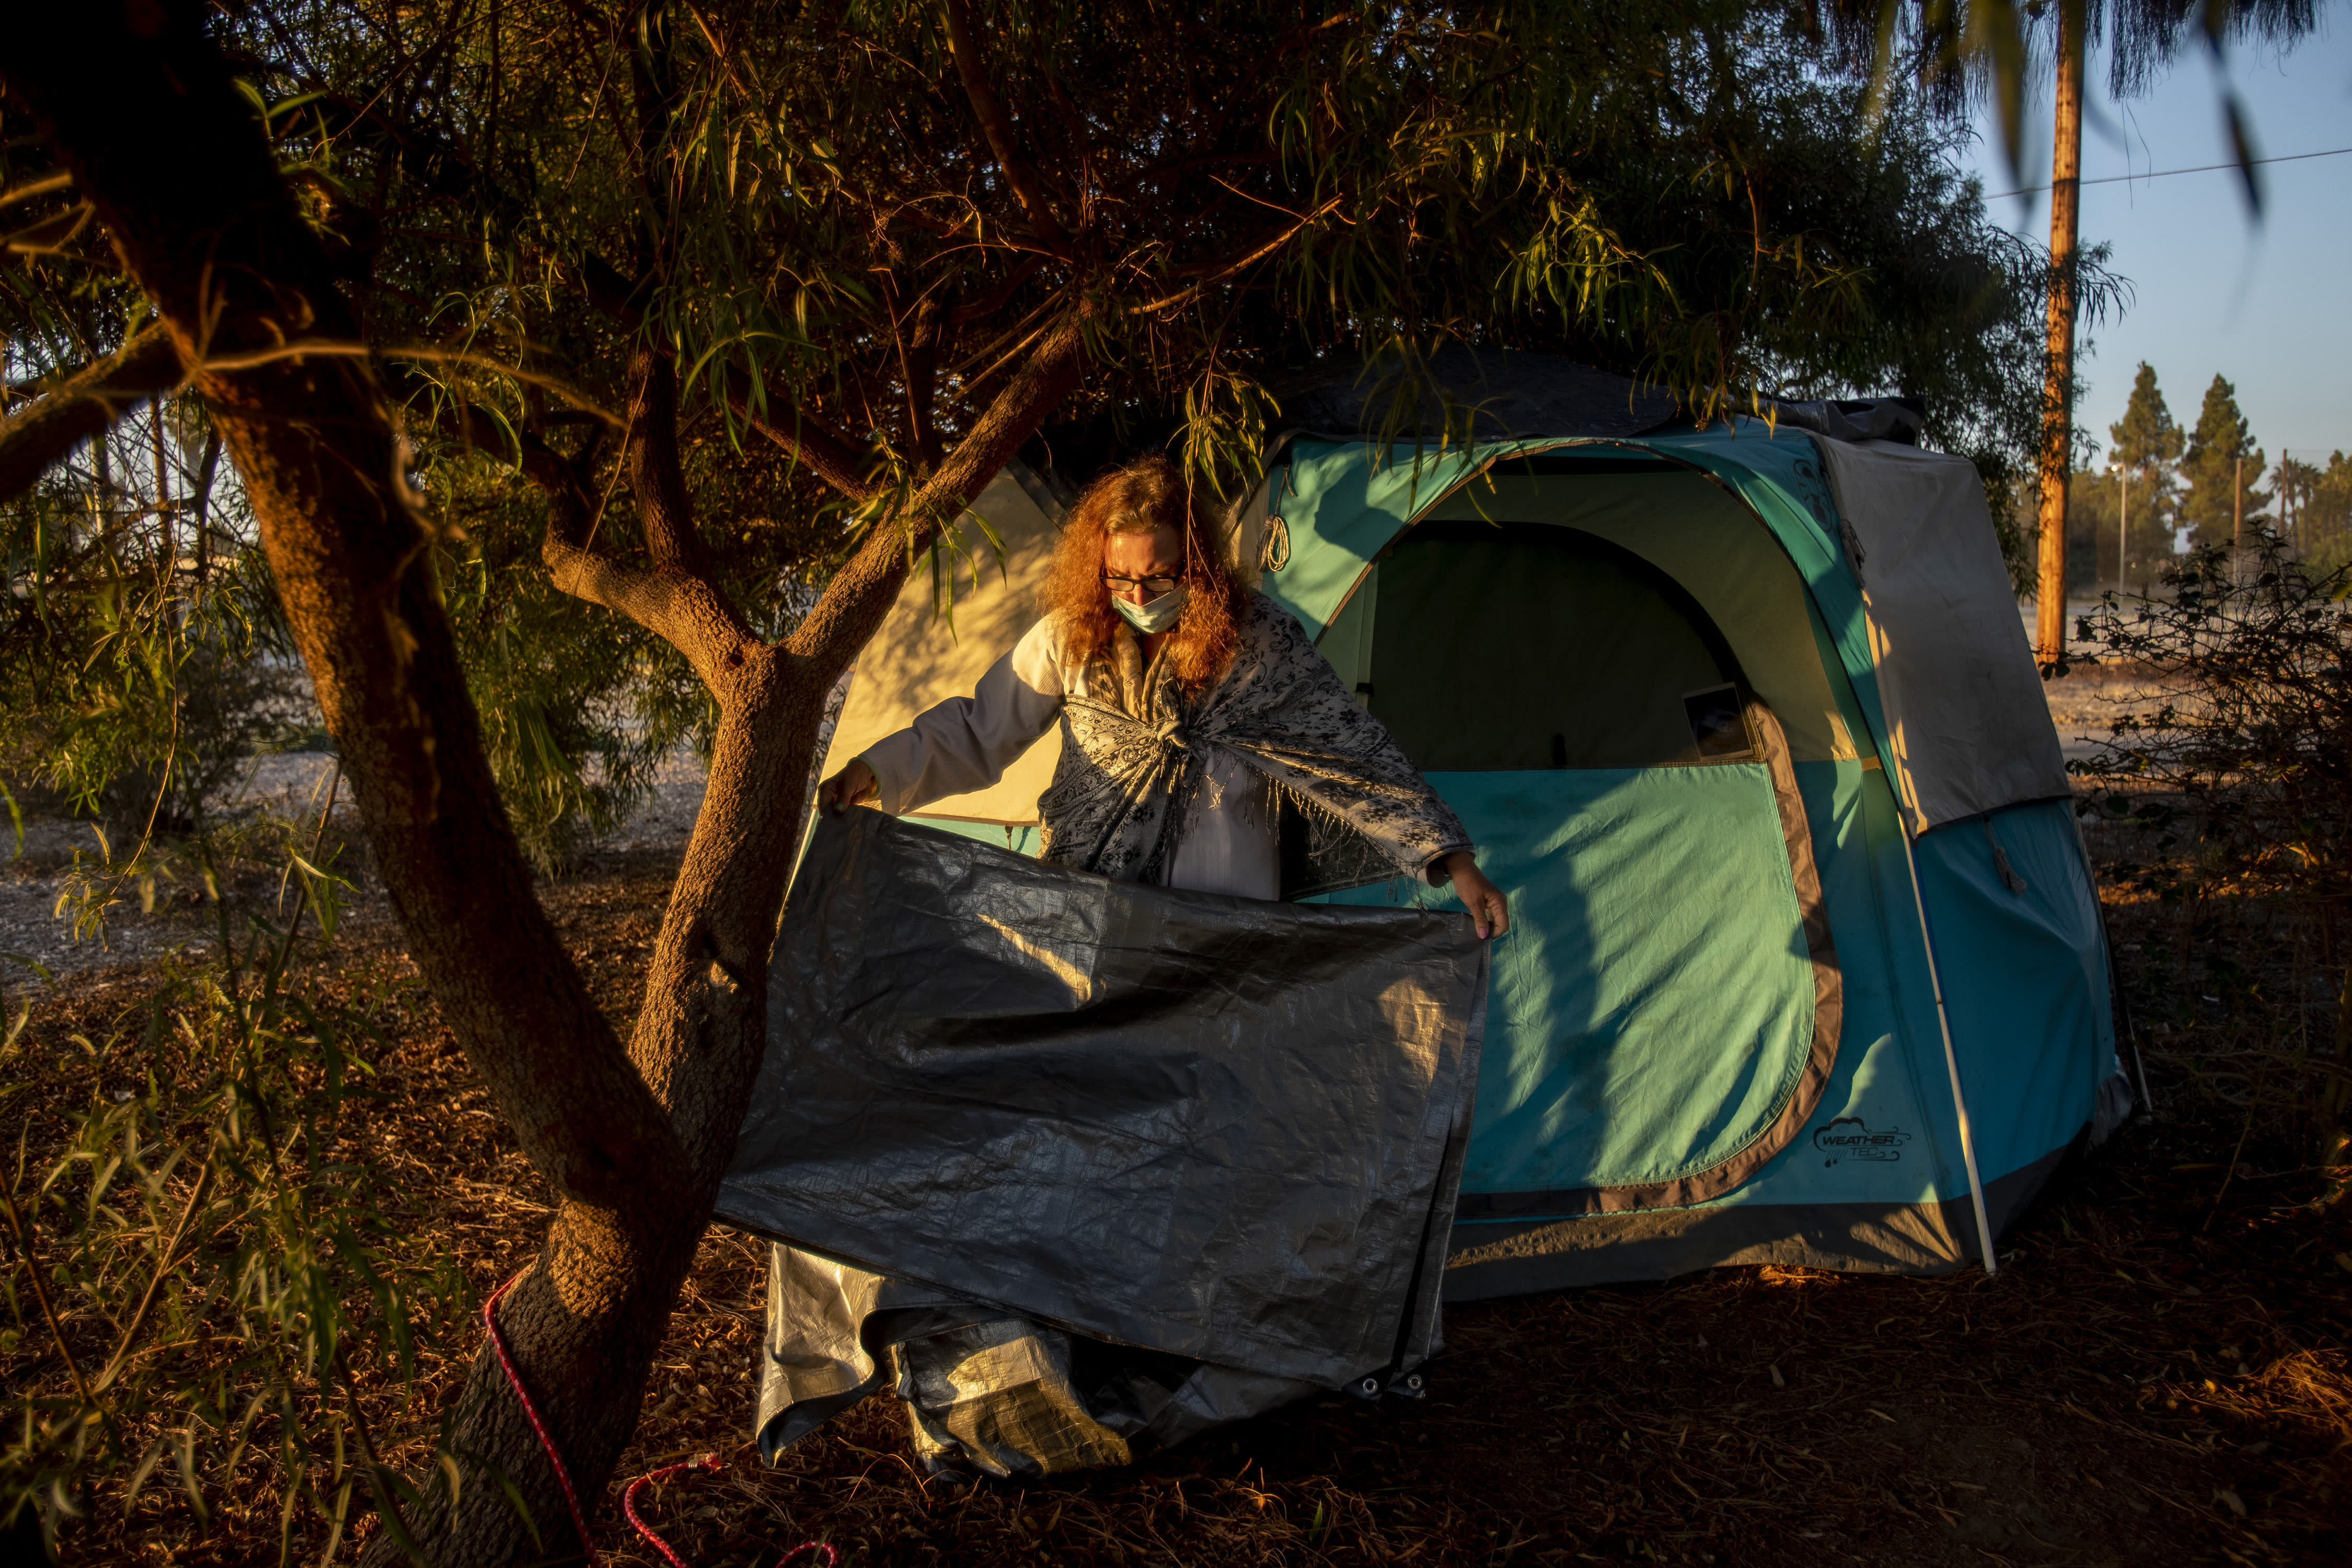 More older Californians are falling into homelessness. A new study examines why